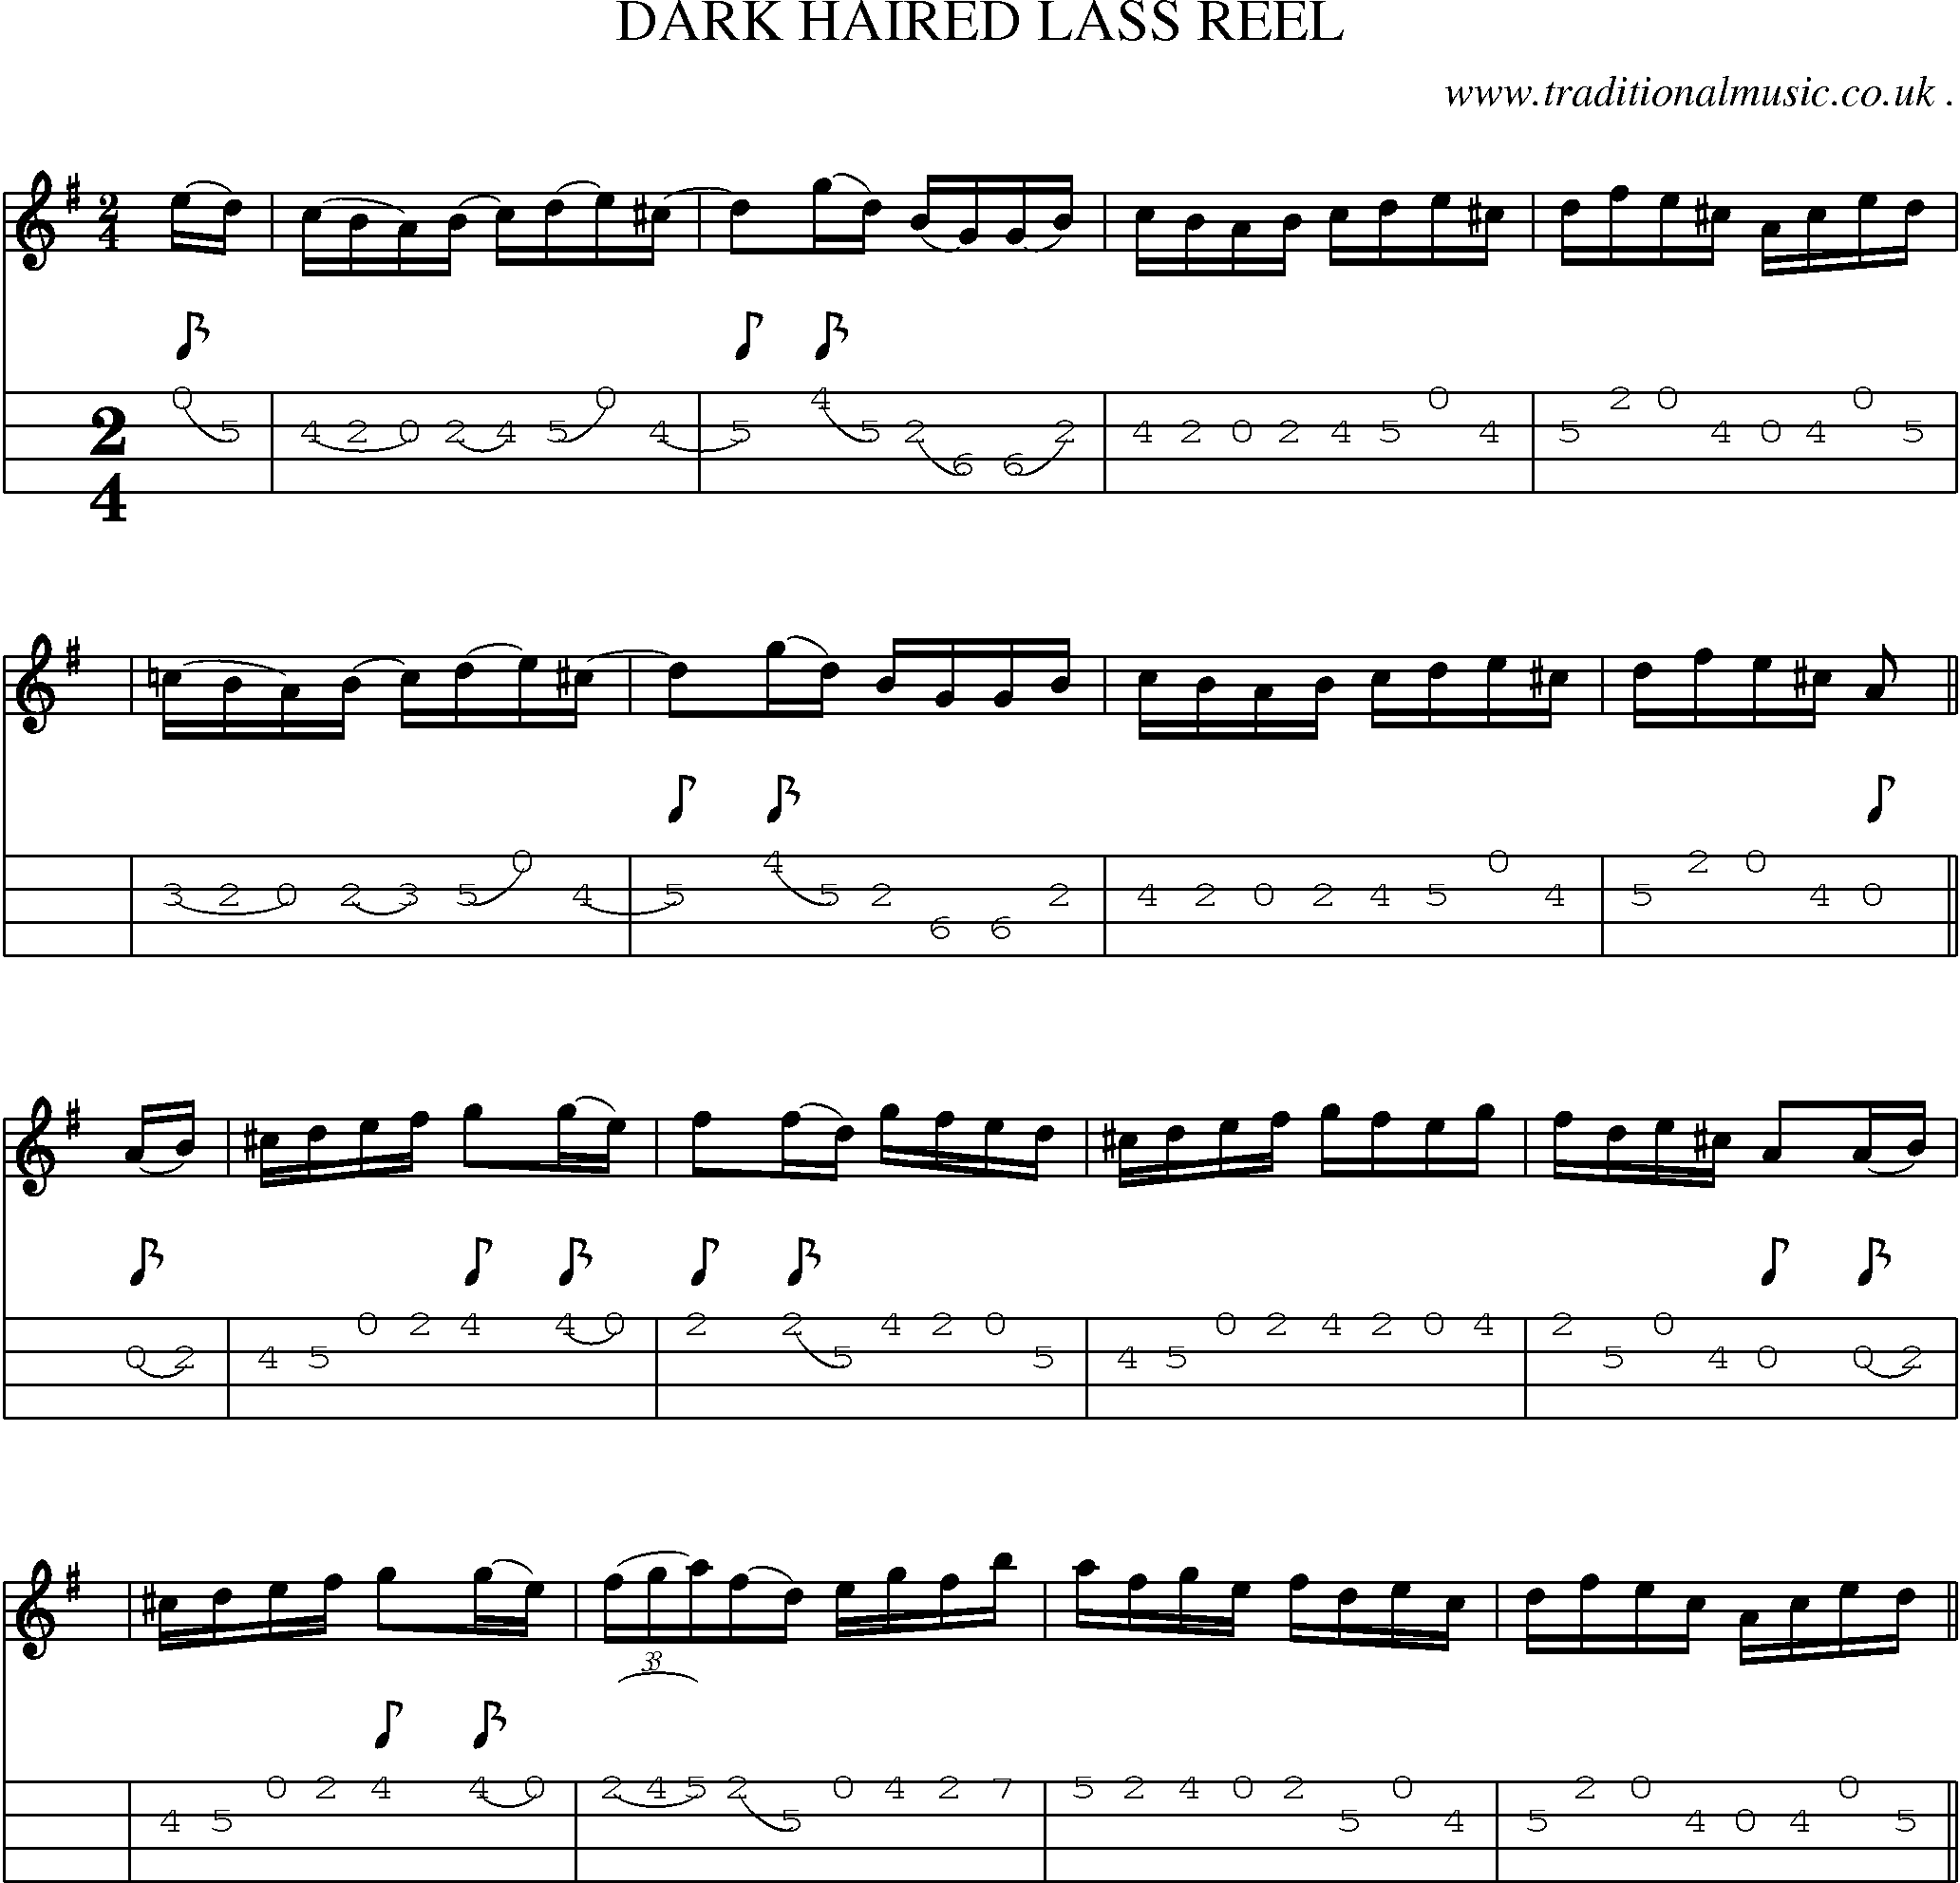 Sheet-Music and Mandolin Tabs for Dark Haired Lass Reel